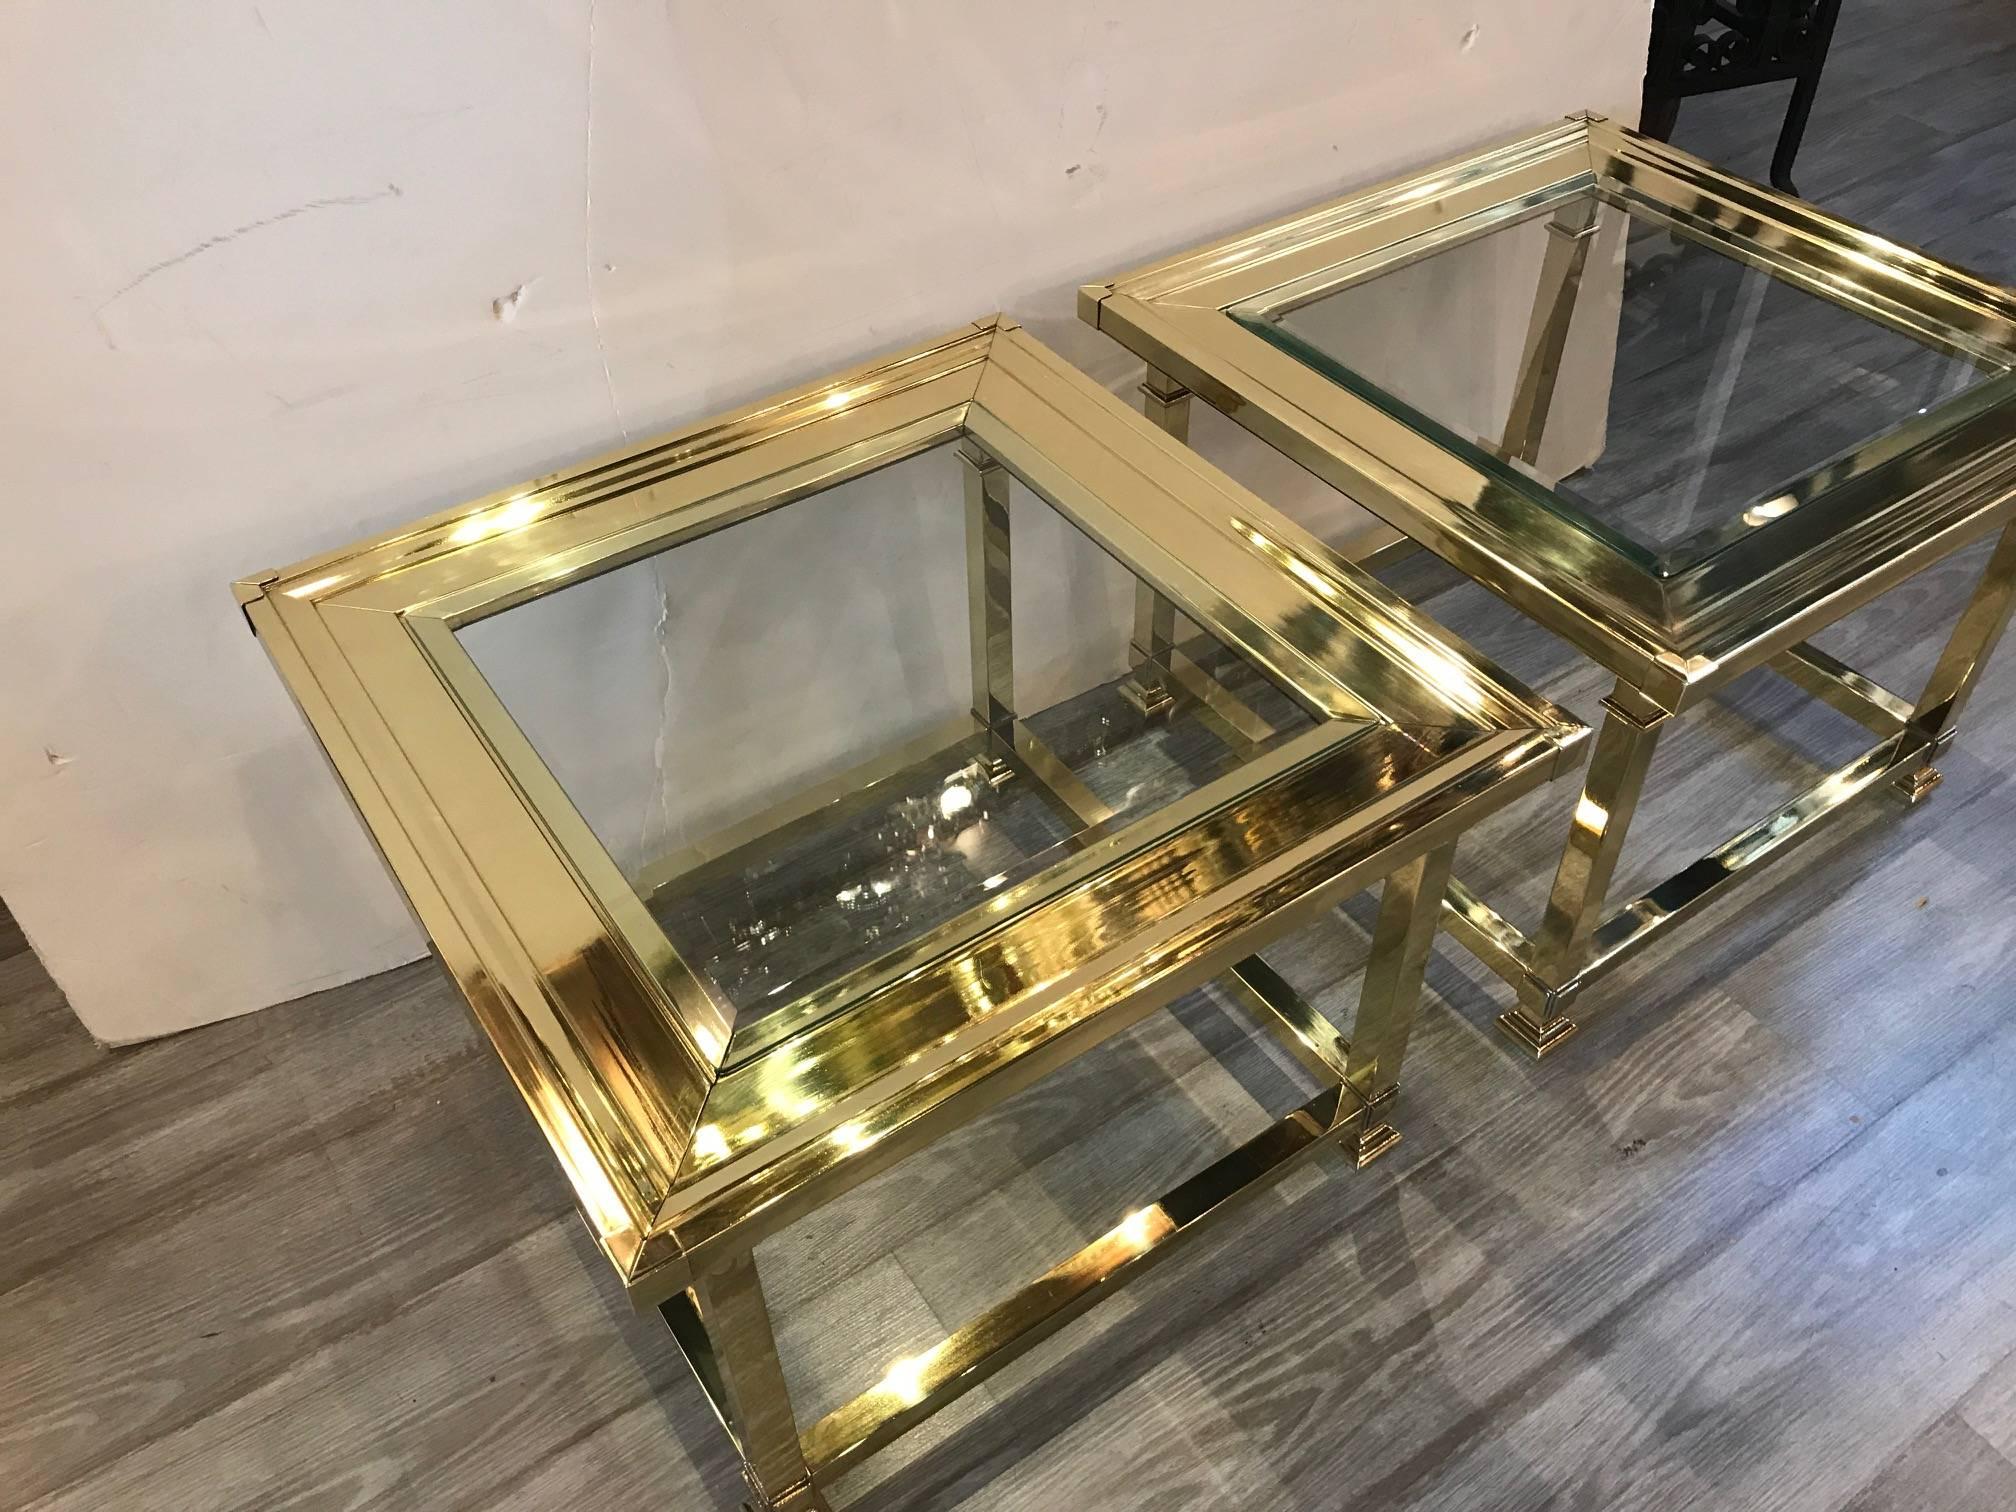 High style polished brass and glass square cocktail tables made by Mastercraft, circa 1970. The two tables are used together as bunching tables or separately. Versatile and sophisticated.